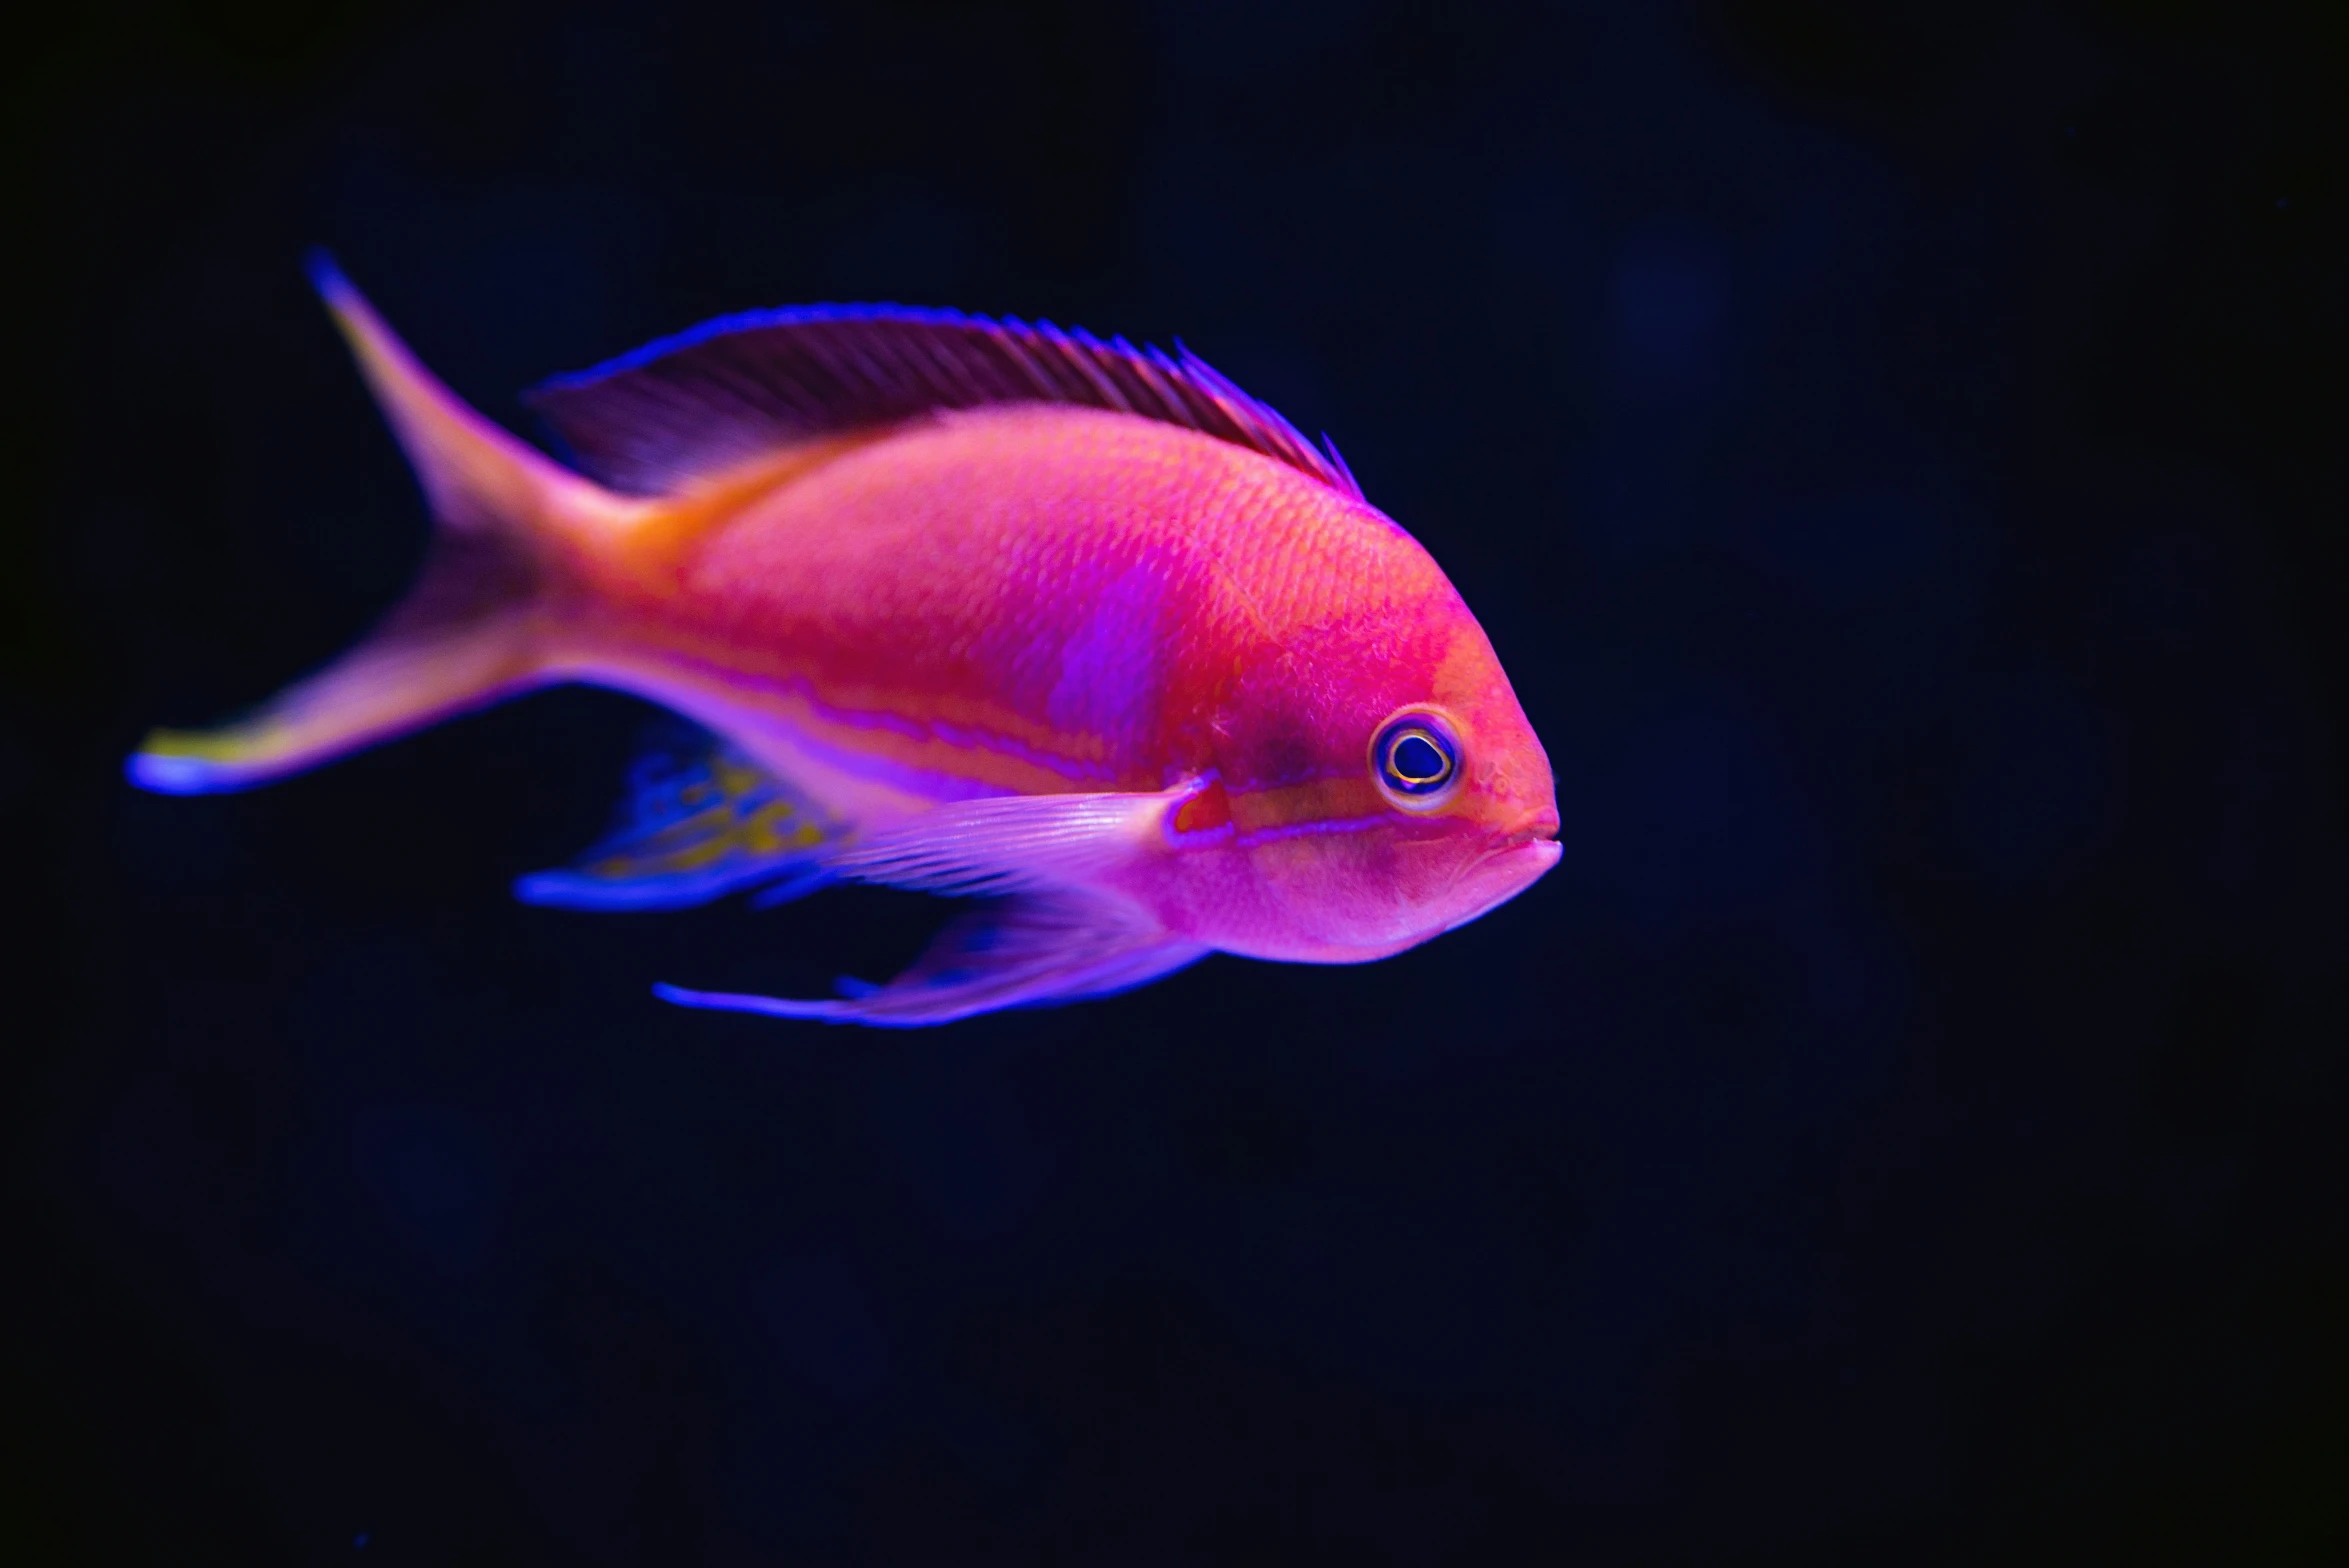 a fish with bright blue and orange markings in its aquarium